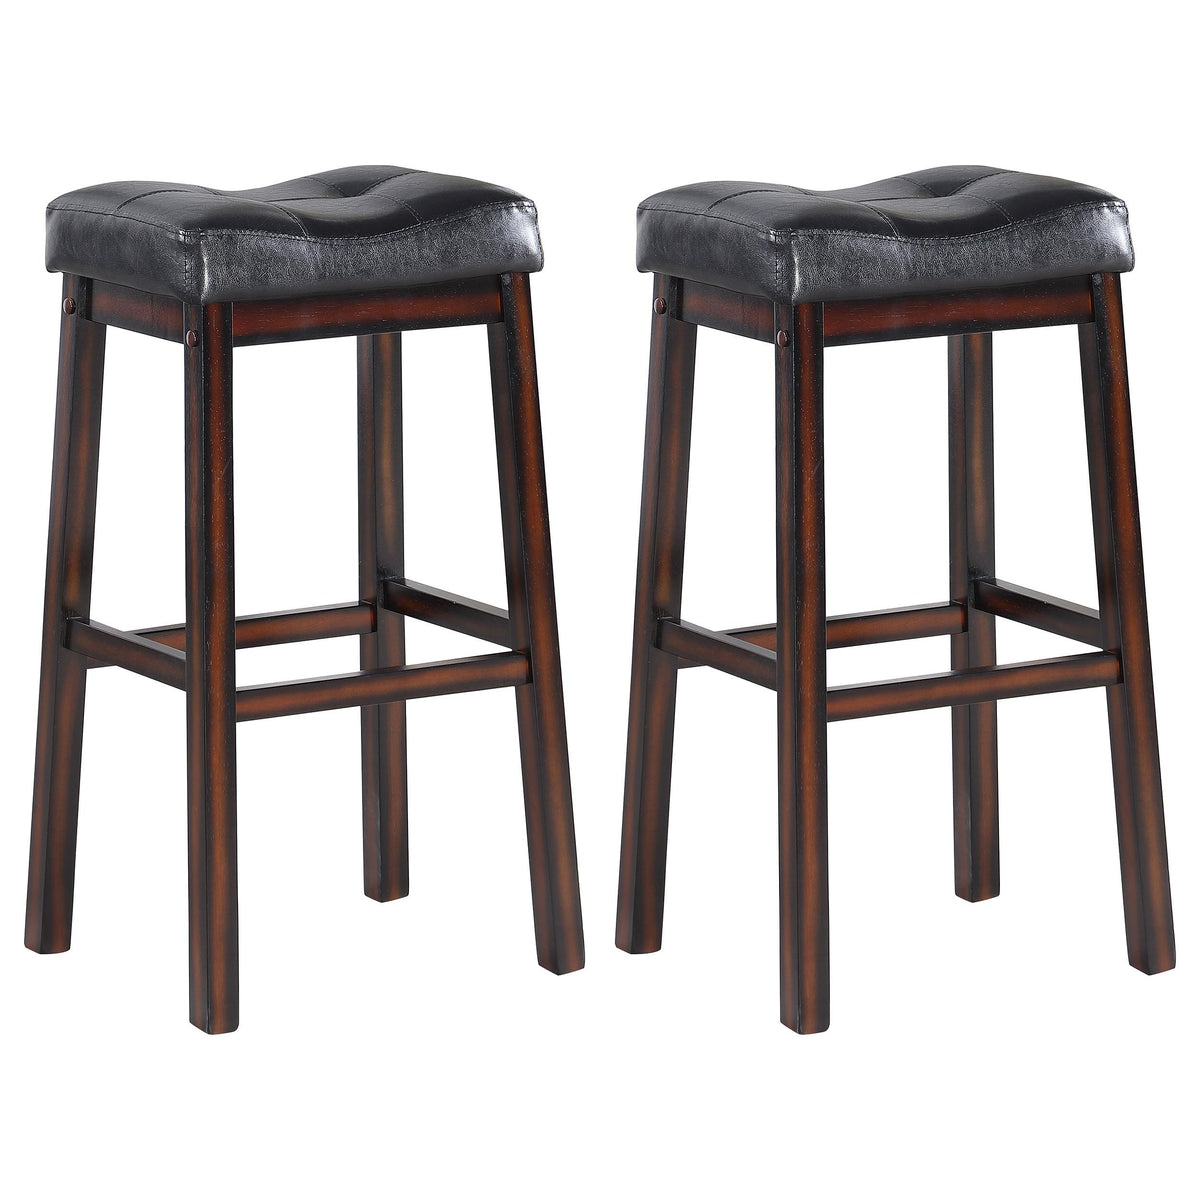 Donald Upholstered Bar Stools Black and Cappuccino (Set of 2)  Las Vegas Furniture Stores